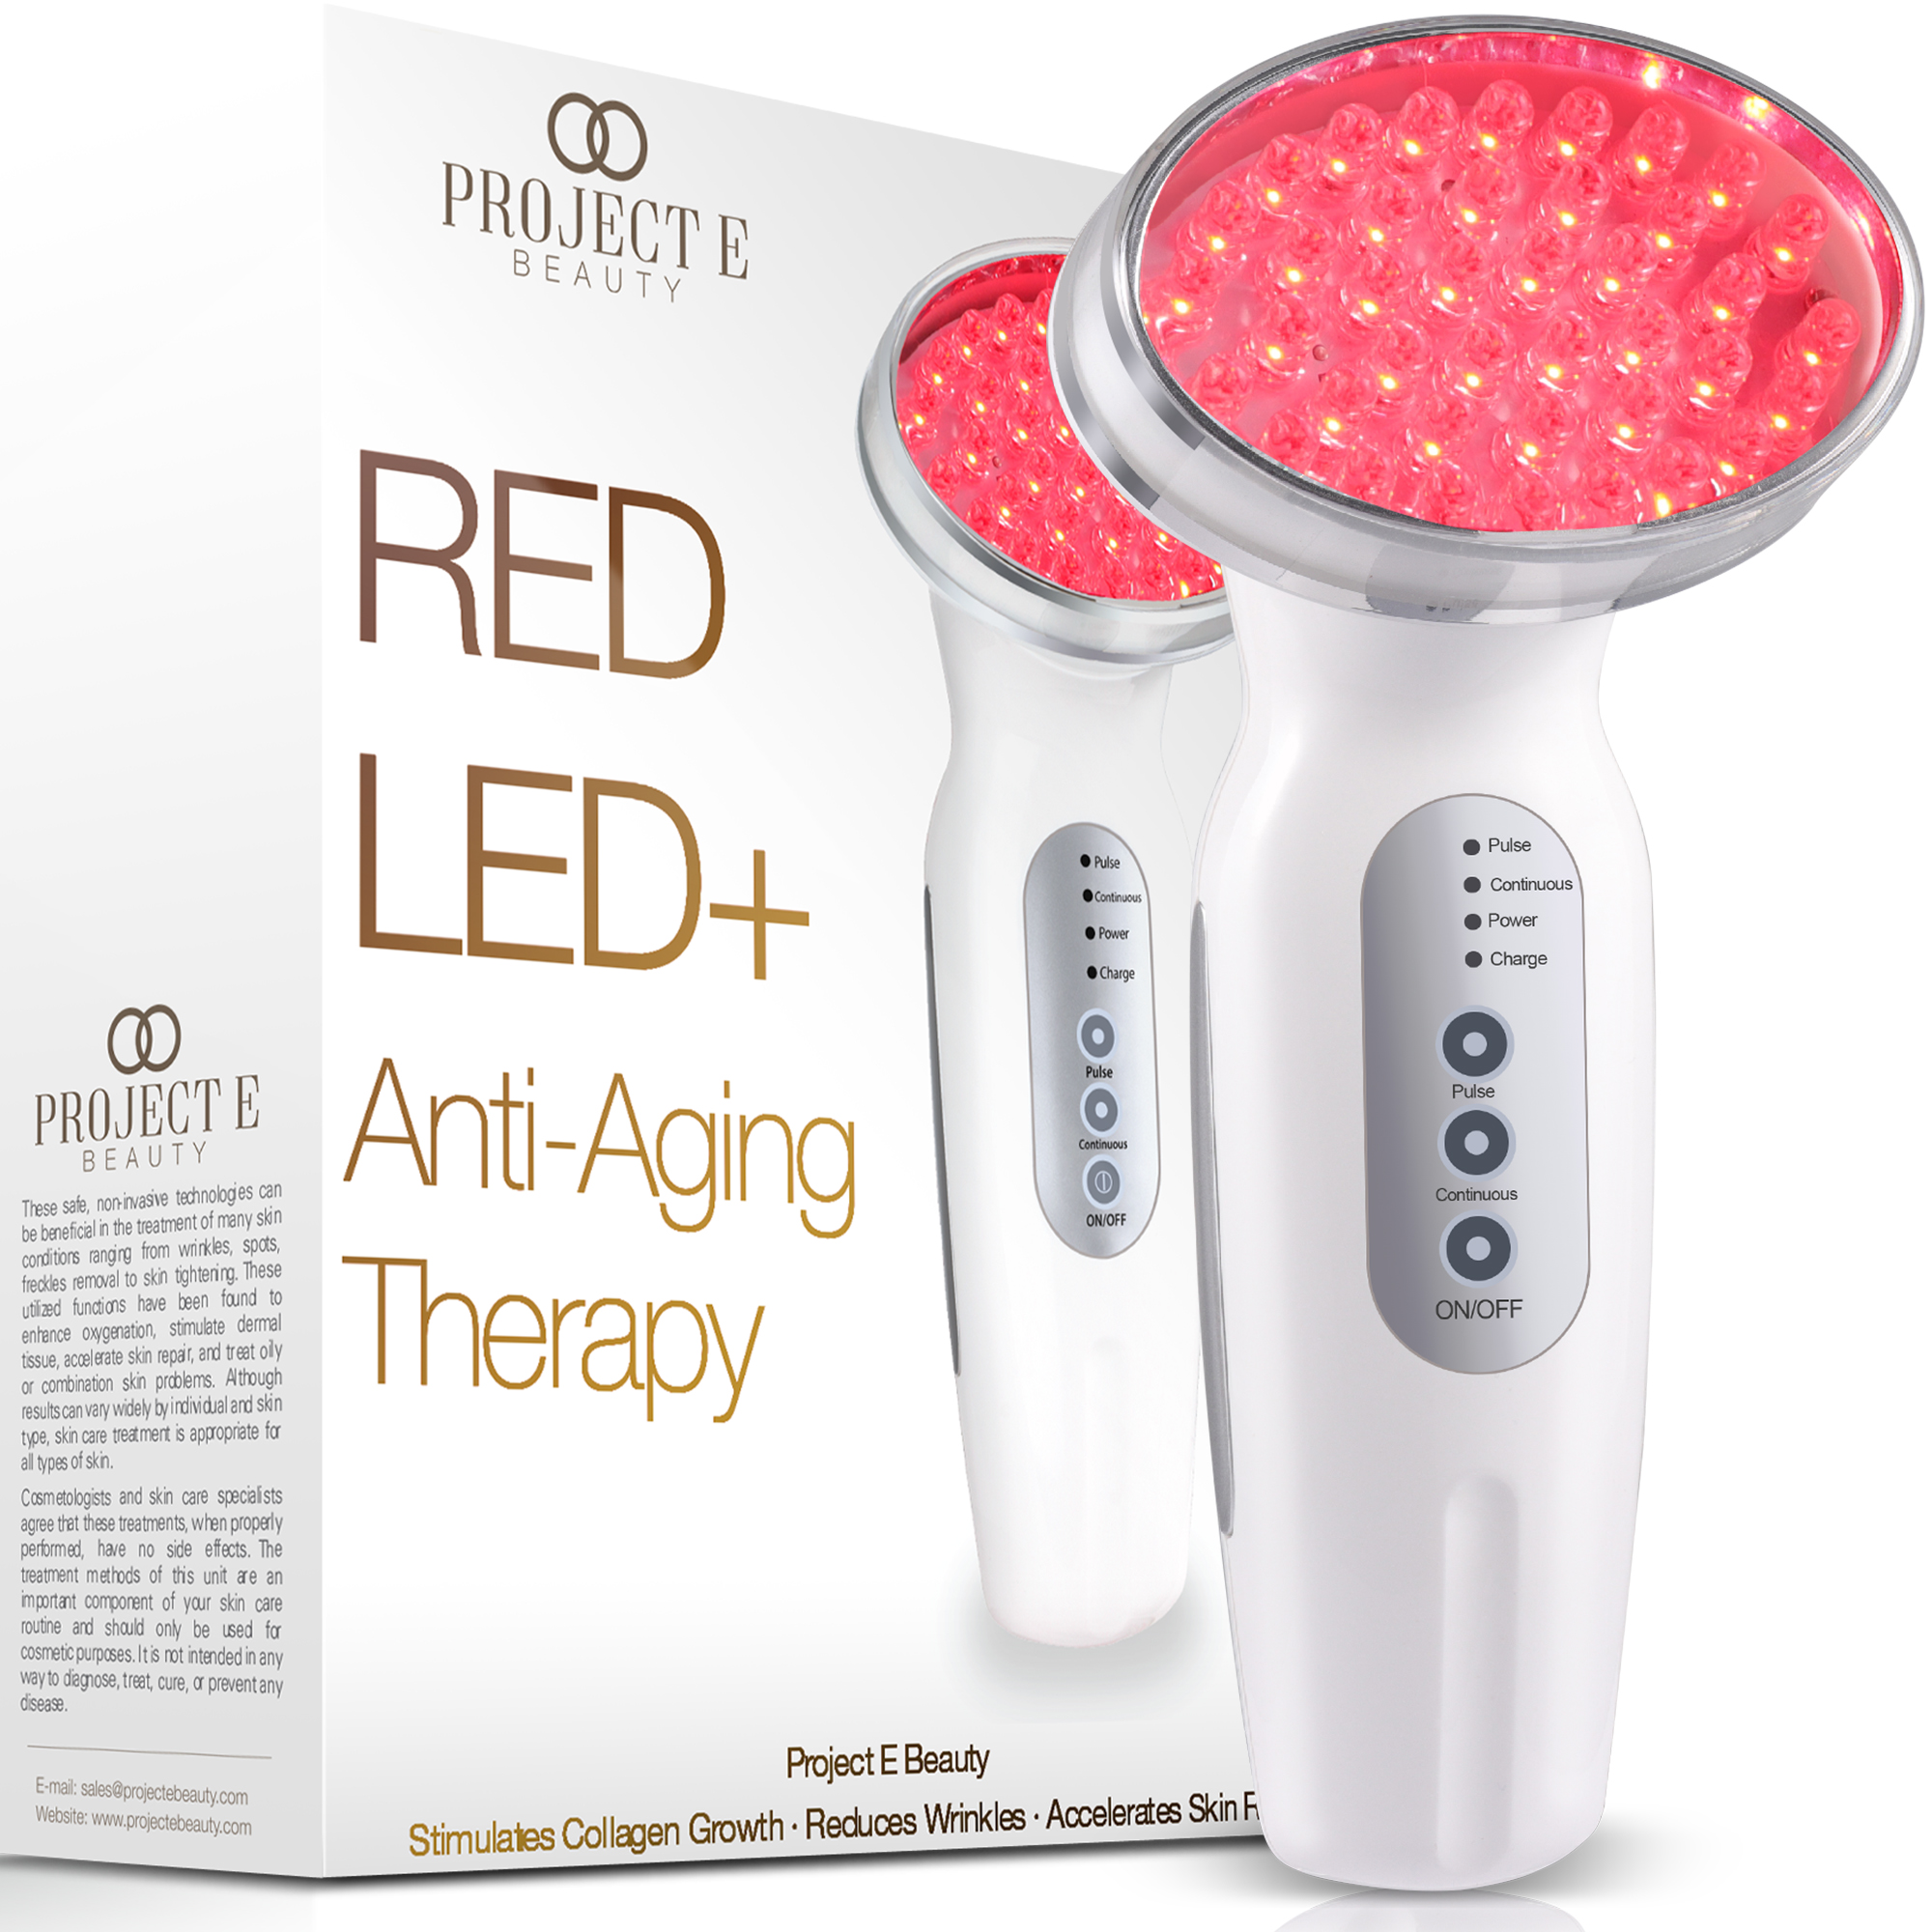 Project E Beauty RED LED+ | Anti-Aging Therapy | Reduce Fine Lines & Wrinkles | Collagen Boost - image 1 of 8